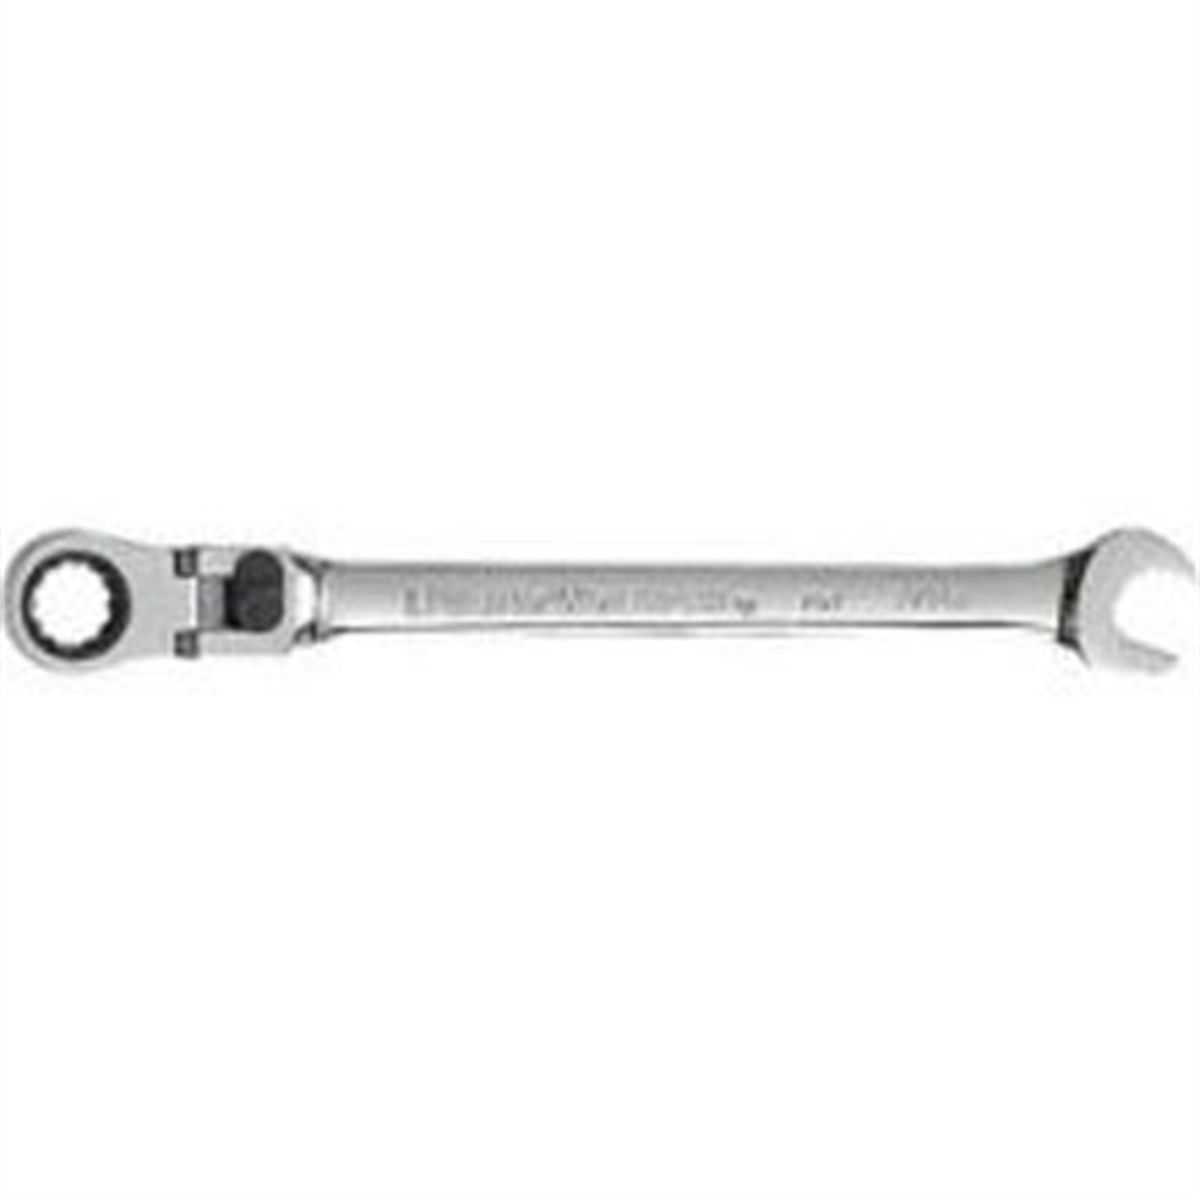 7/16" Flex Combination Ratcheting Wrench